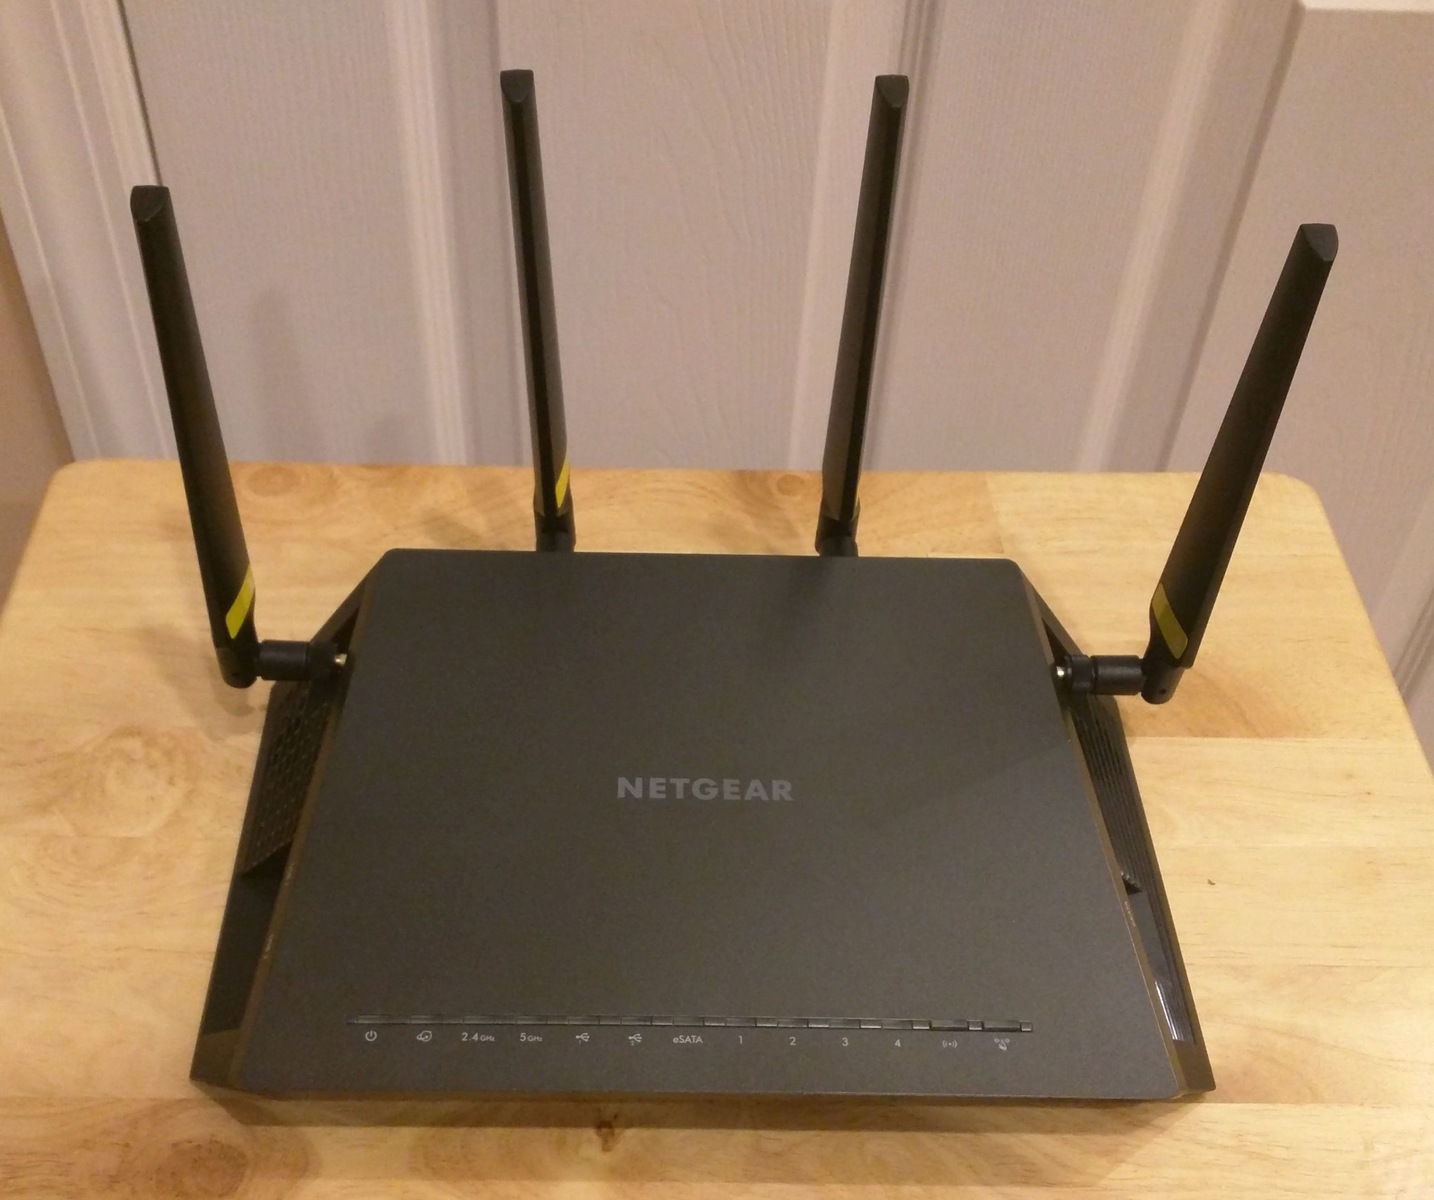 How To Setup Netgear Wireless Router Without CD